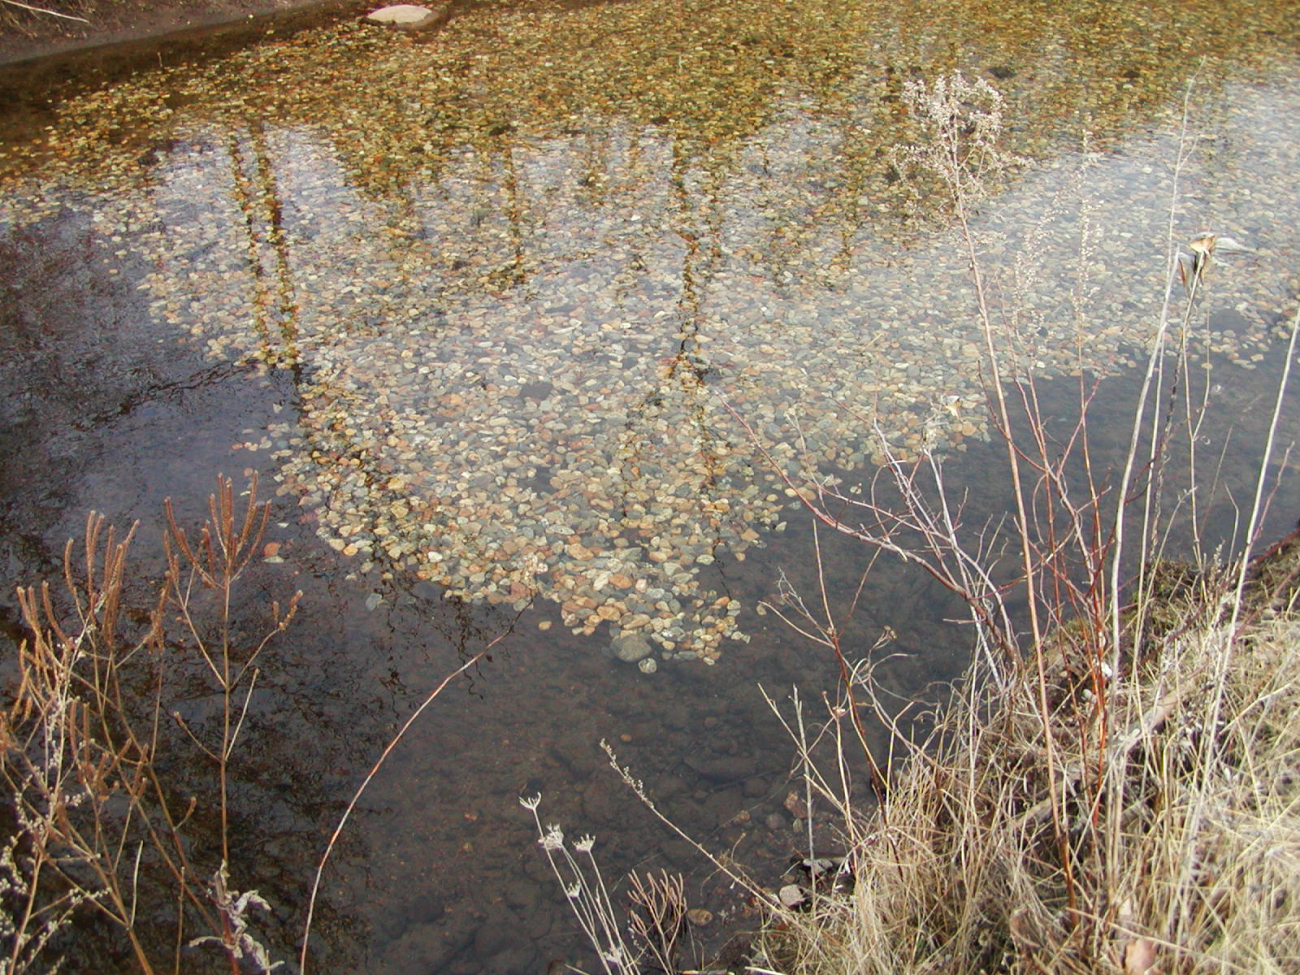 A close-up of a small size patch of new habitat